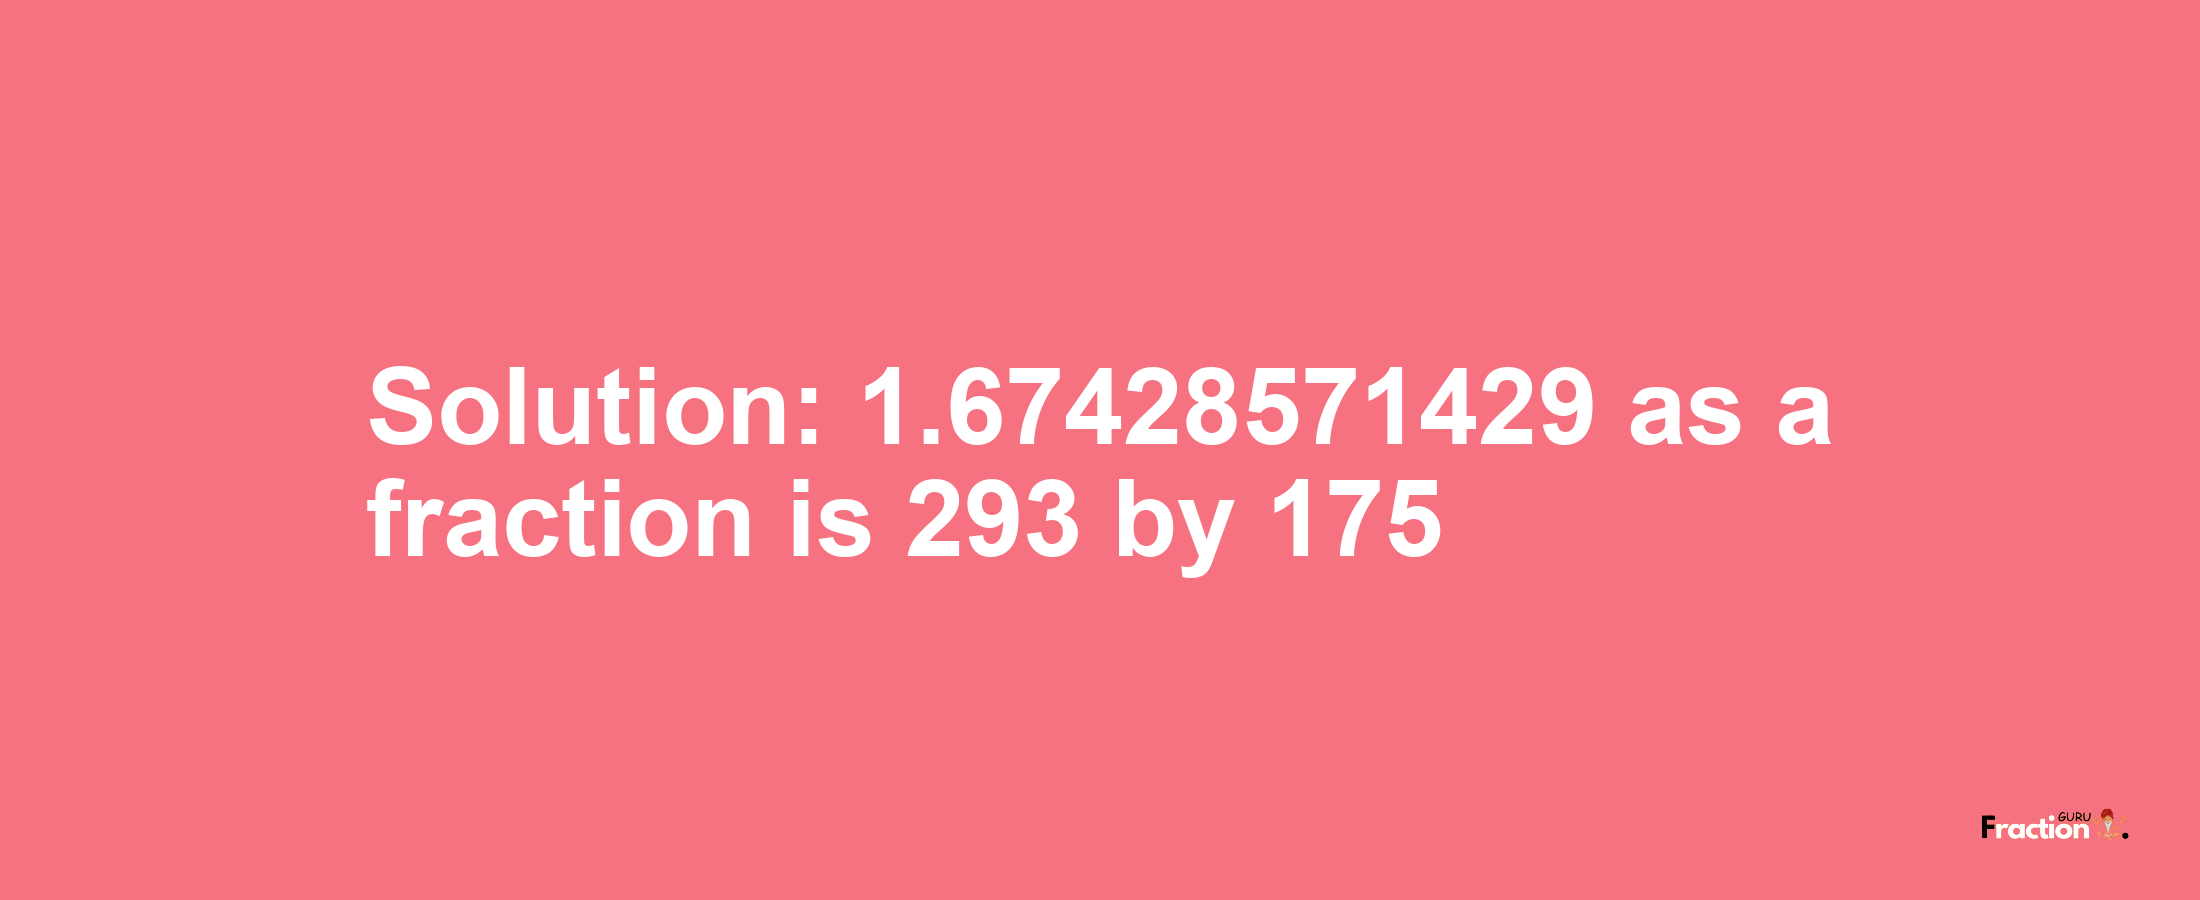 Solution:1.67428571429 as a fraction is 293/175